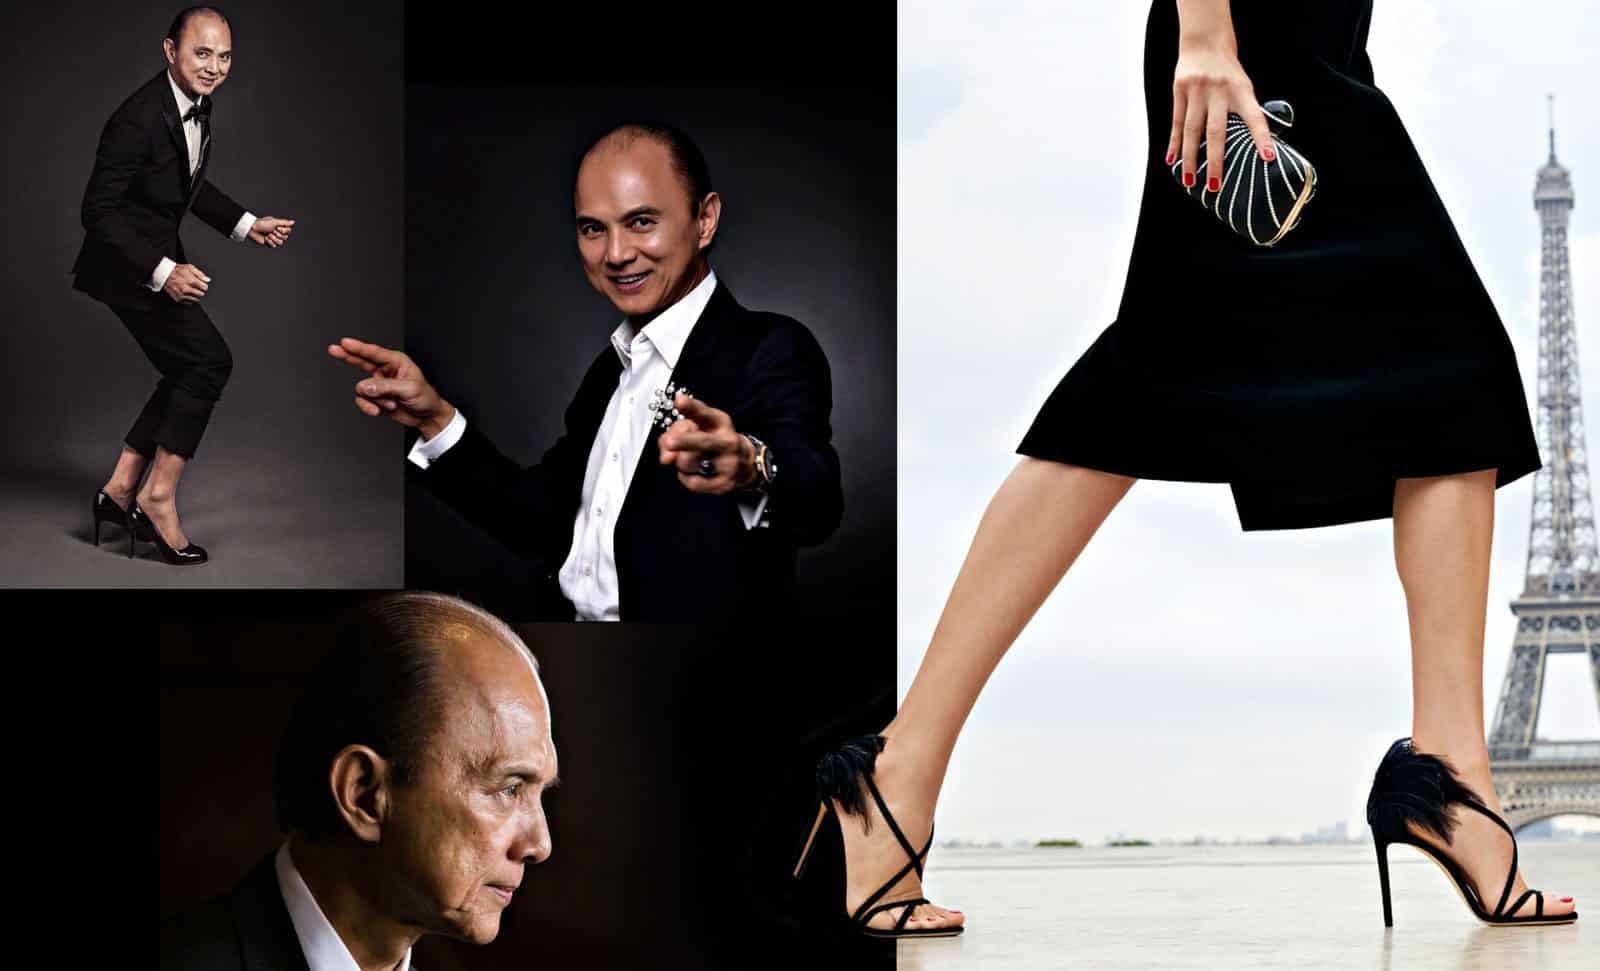 Jimmy Choo: Celebrating 25 Years As One of The Biggest Names in Luxury